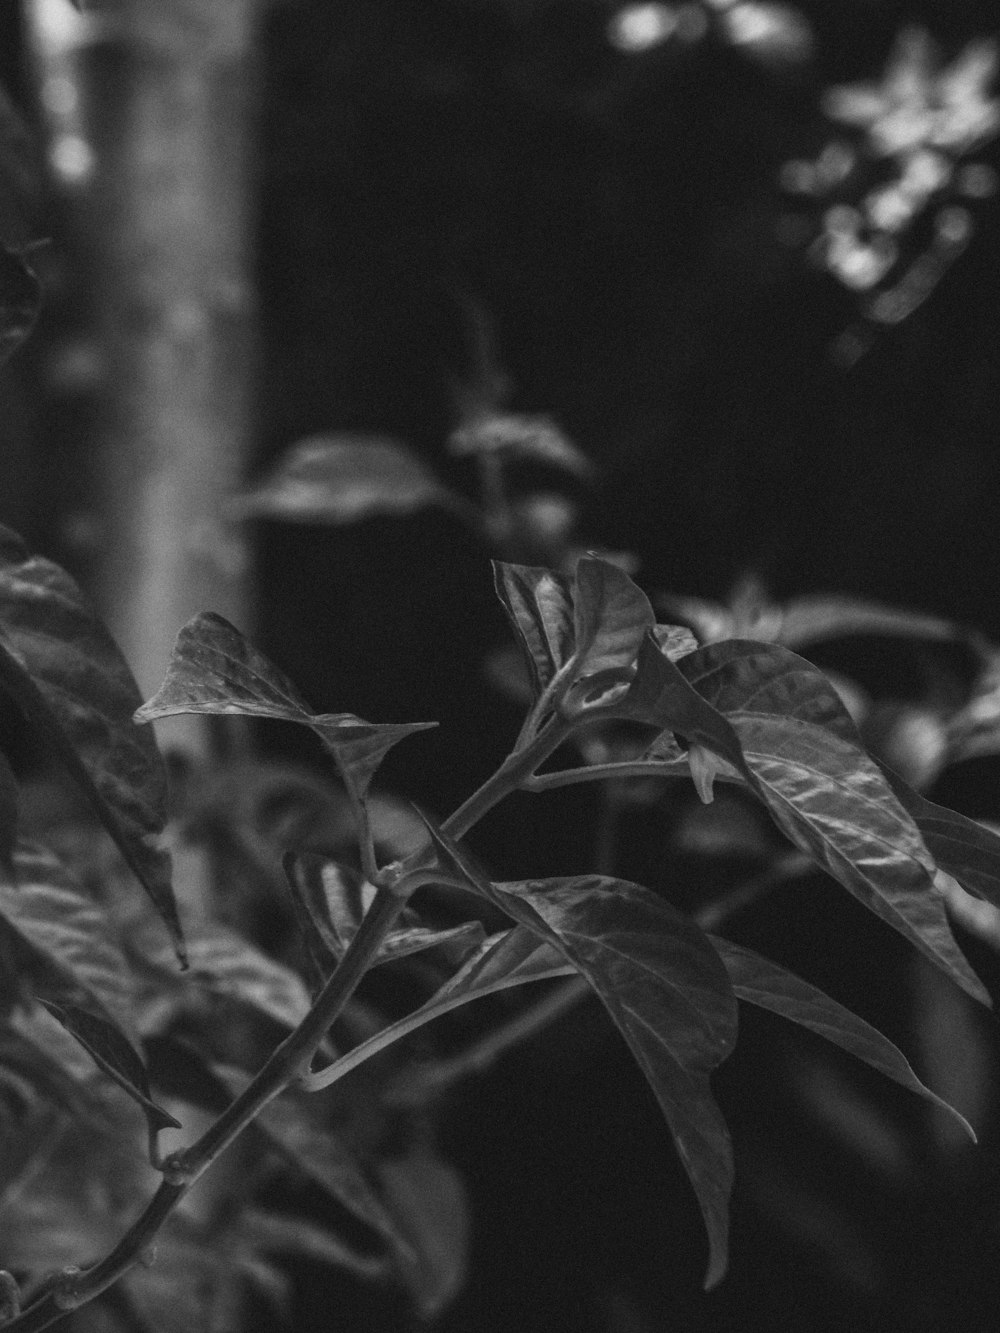 green leaves in grayscale photography